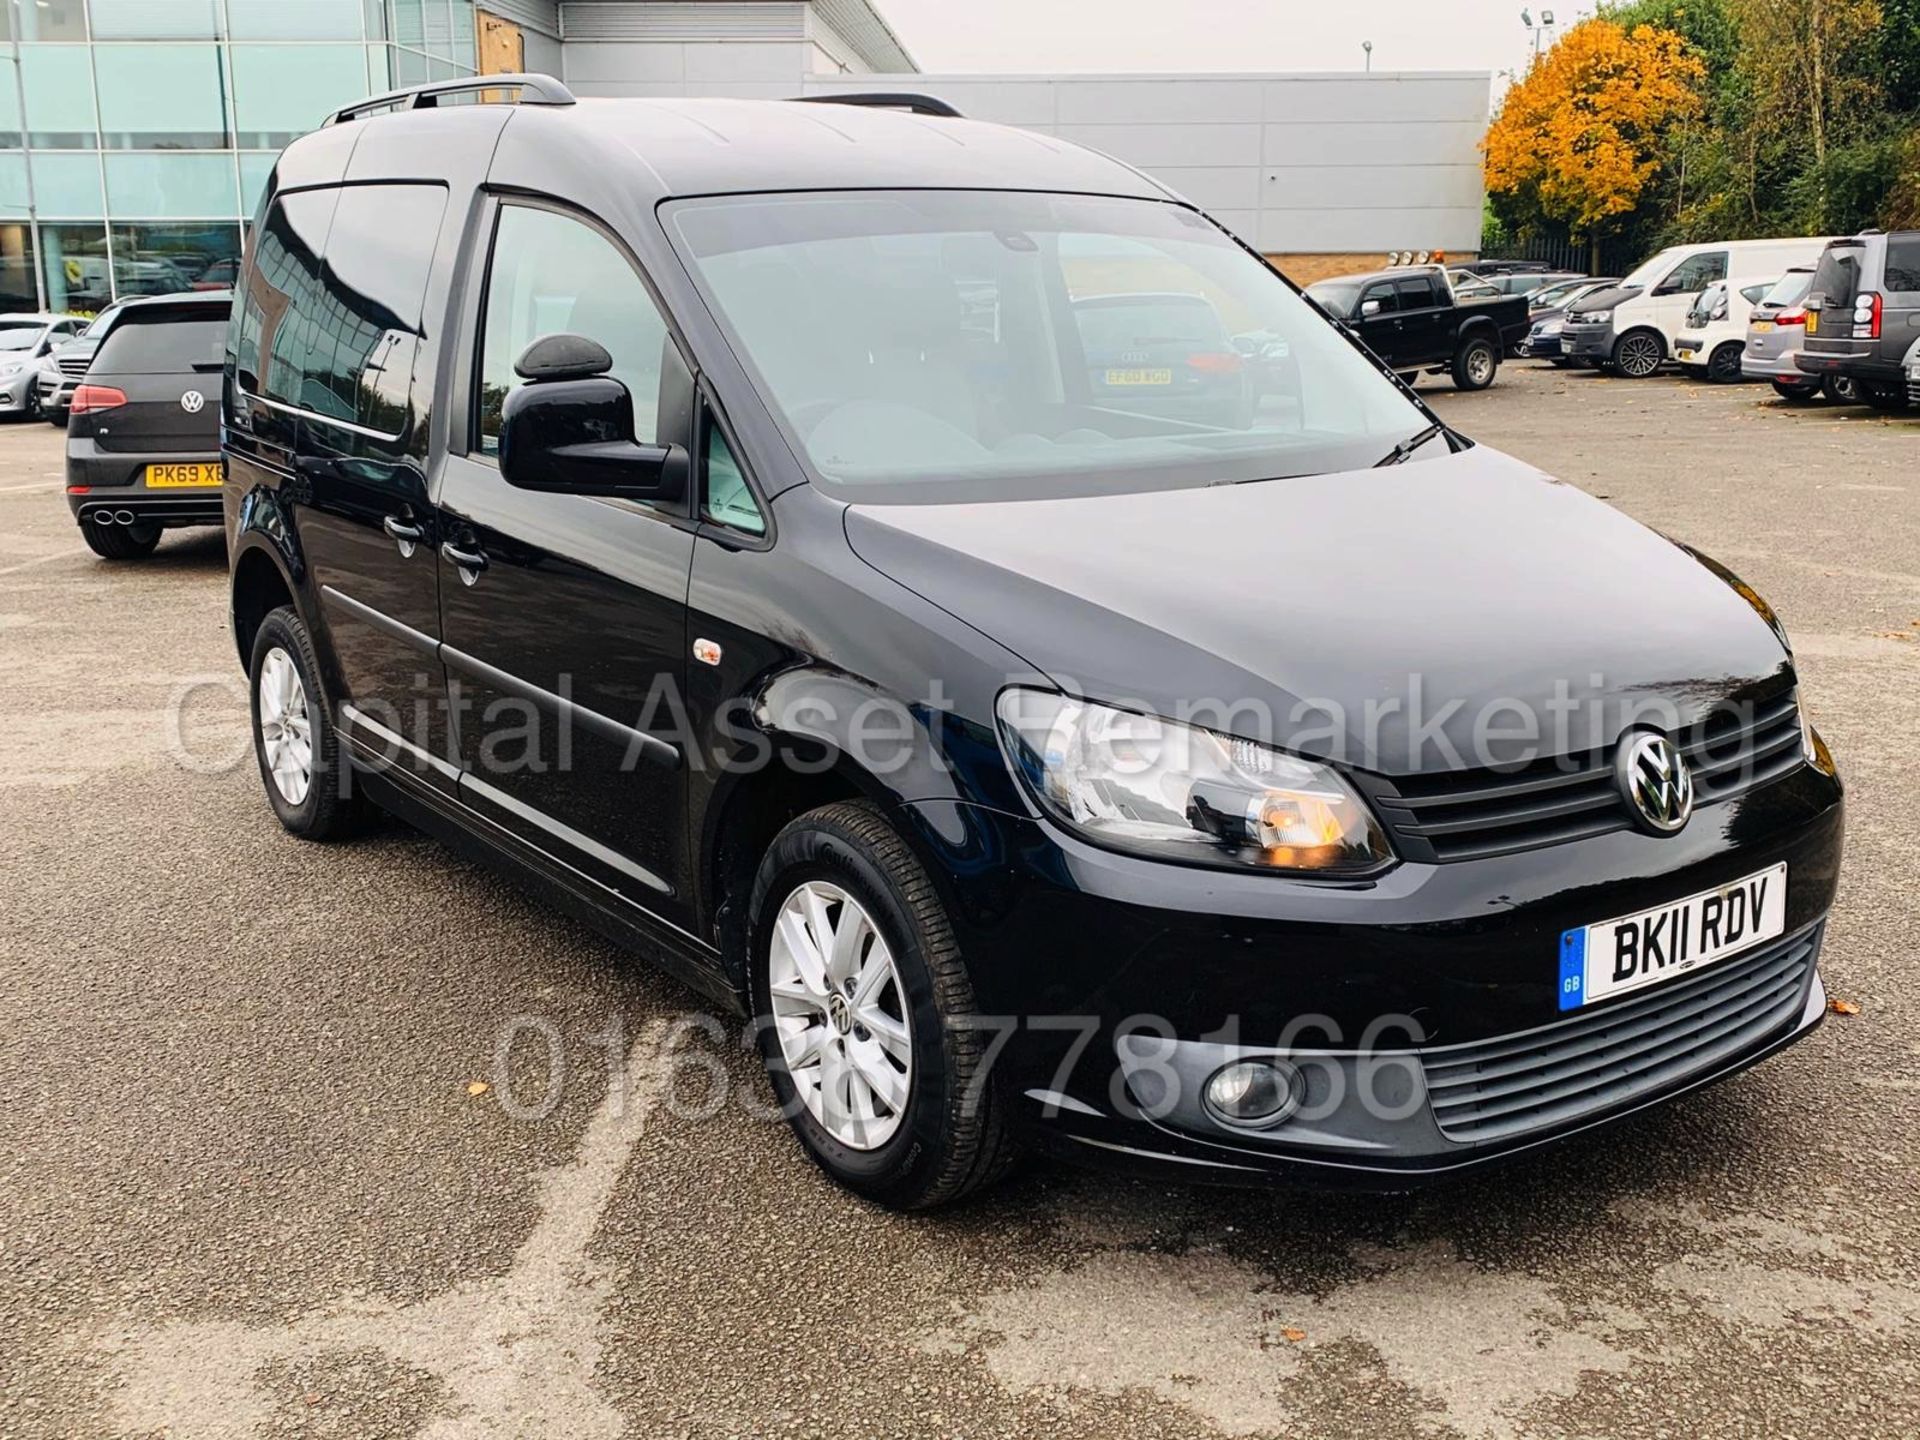 (On Sale) VOLKSWAGEN CADDY C20 *LIFE* DISABILITY ACCESS / WAV (2011) '1.6 TDI - AUTO' *A/C*